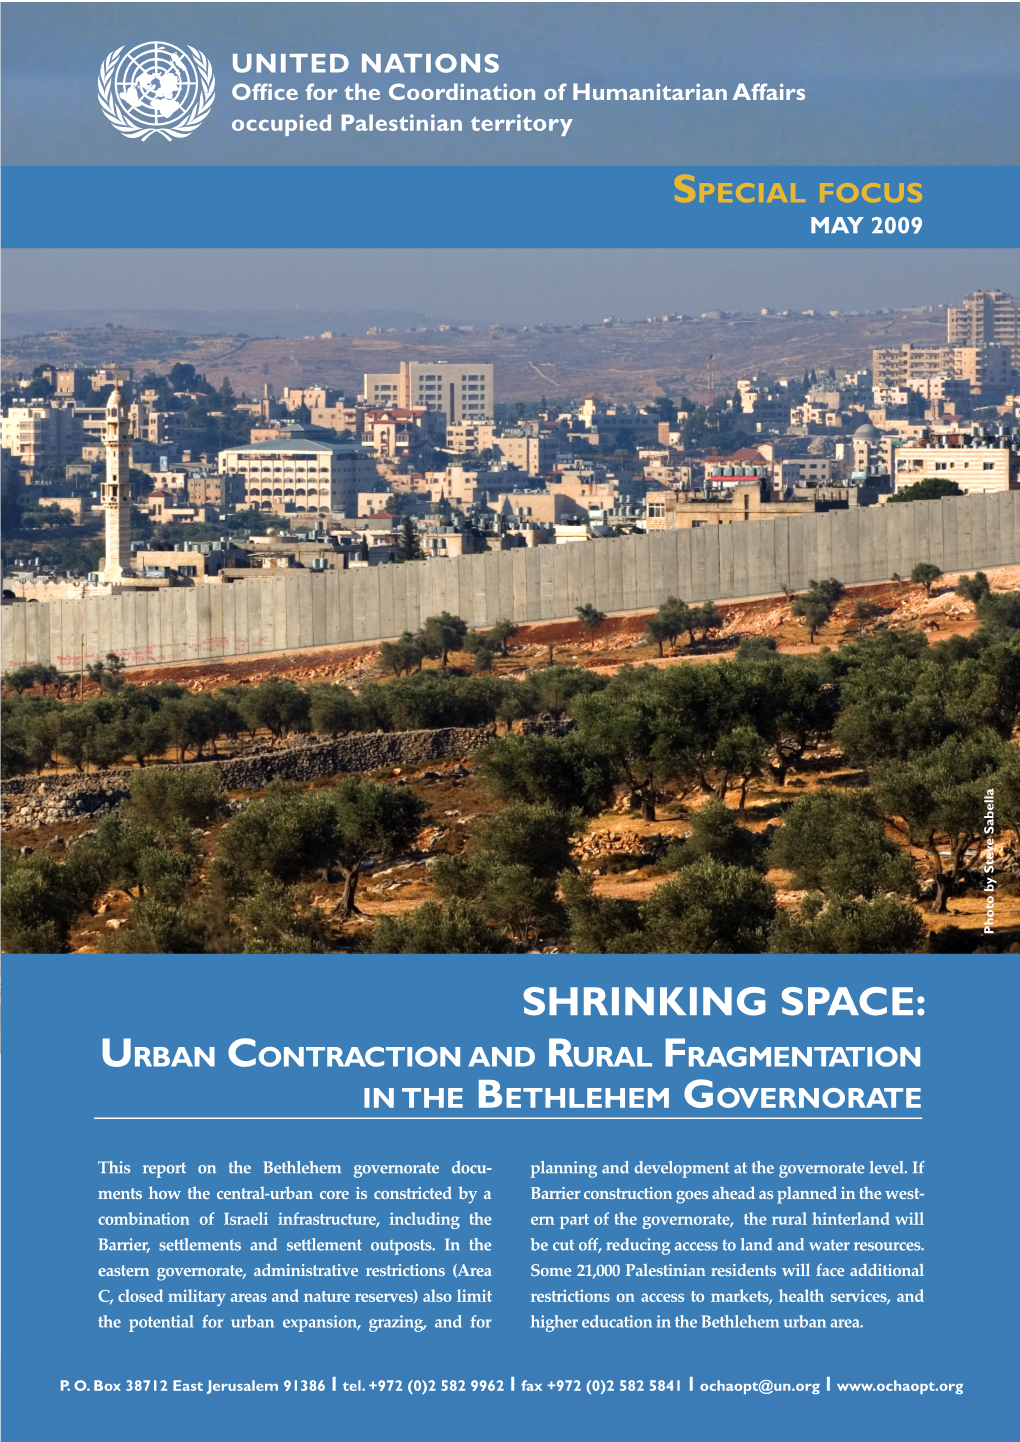 Shrinking Space: Urban Contraction and Rural Fragmentation in the Bethlehem Governorate